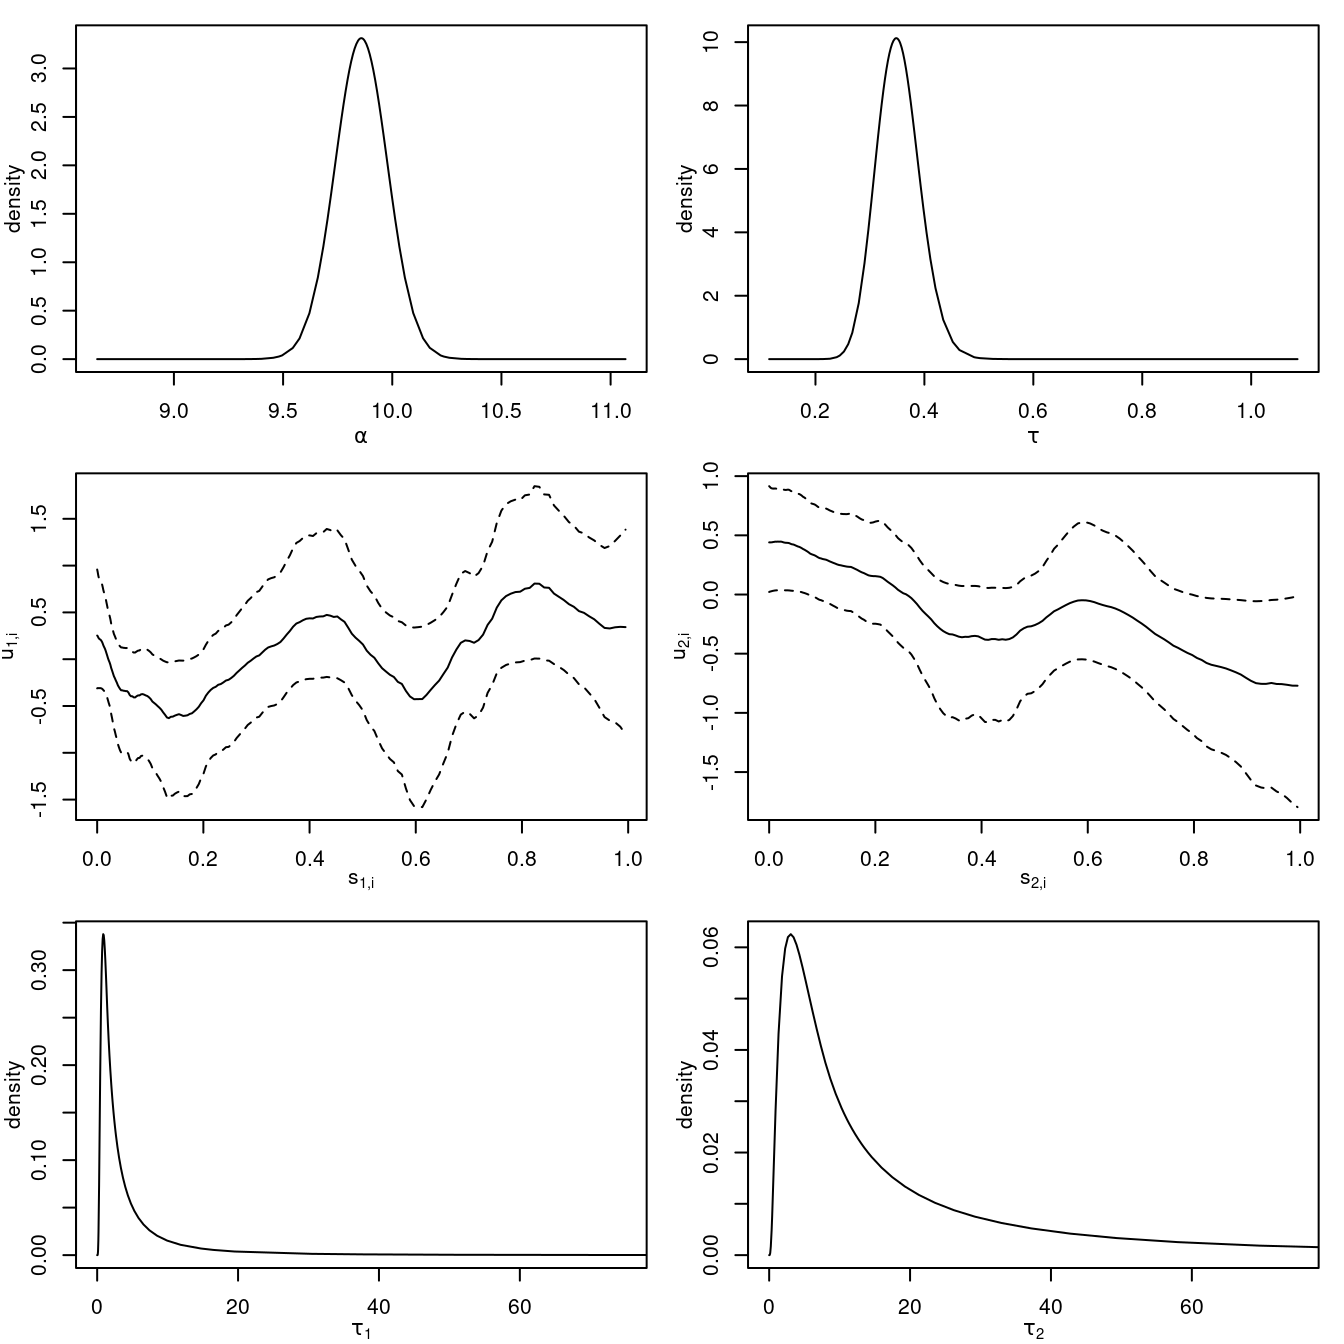 Posterior marginals of the intercept and precisions of the model with non-linear effects on the covariates fitted to the SPDEtoy dataset. The non-linear effects on the covariates are summarized using the posterior mean (solid line) and the limits of 95% credible intervals (dashed line).